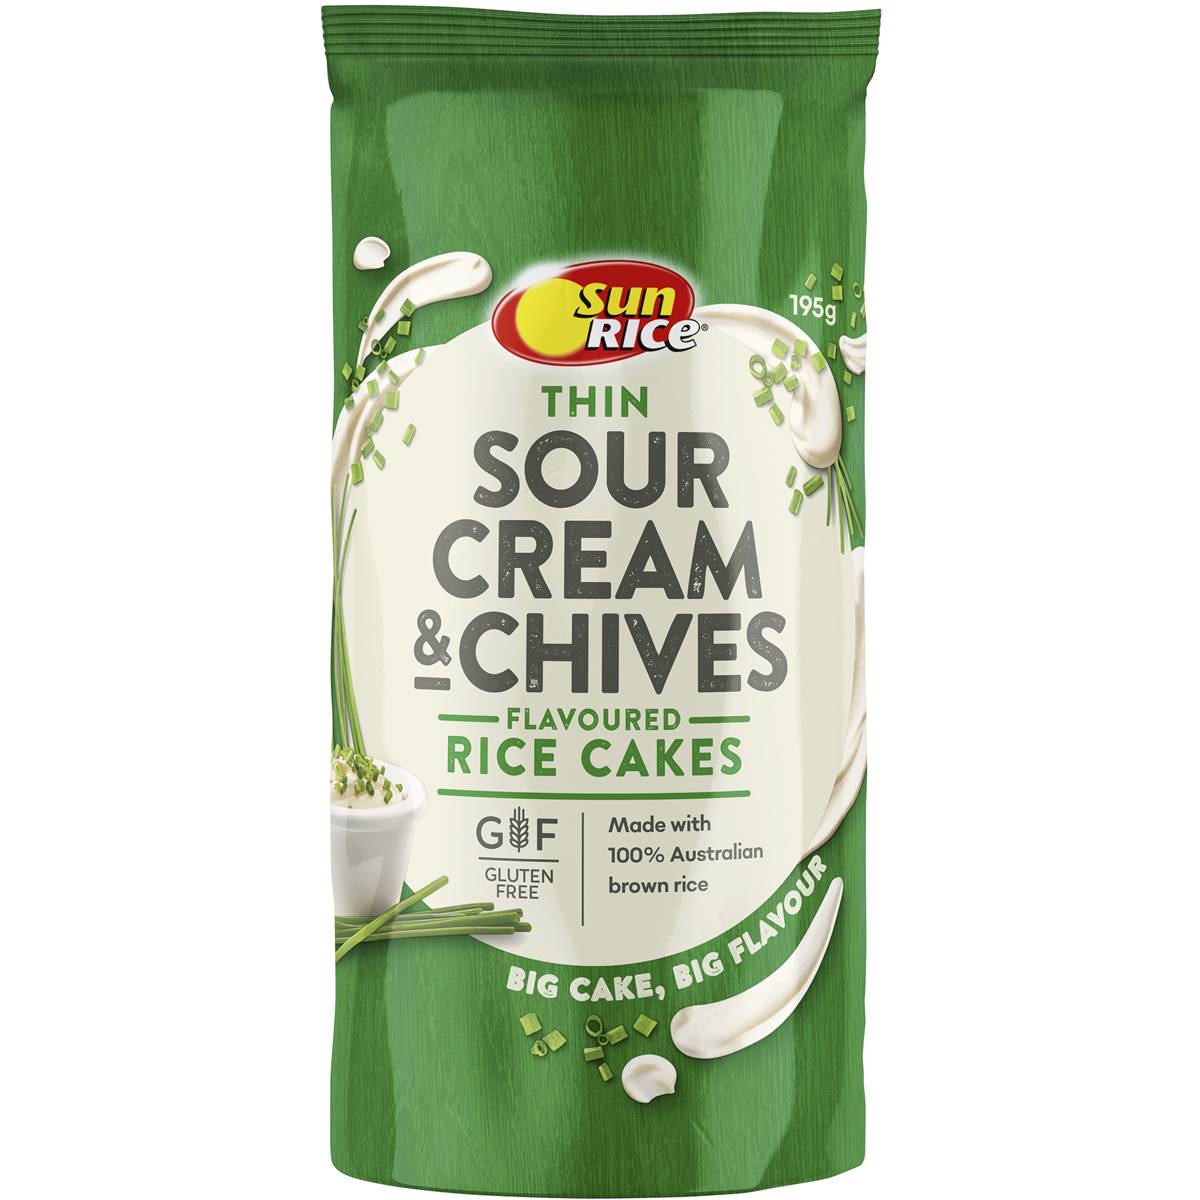 Calories in Sunrice Rice Cakes Thin Sour Cream & Chives